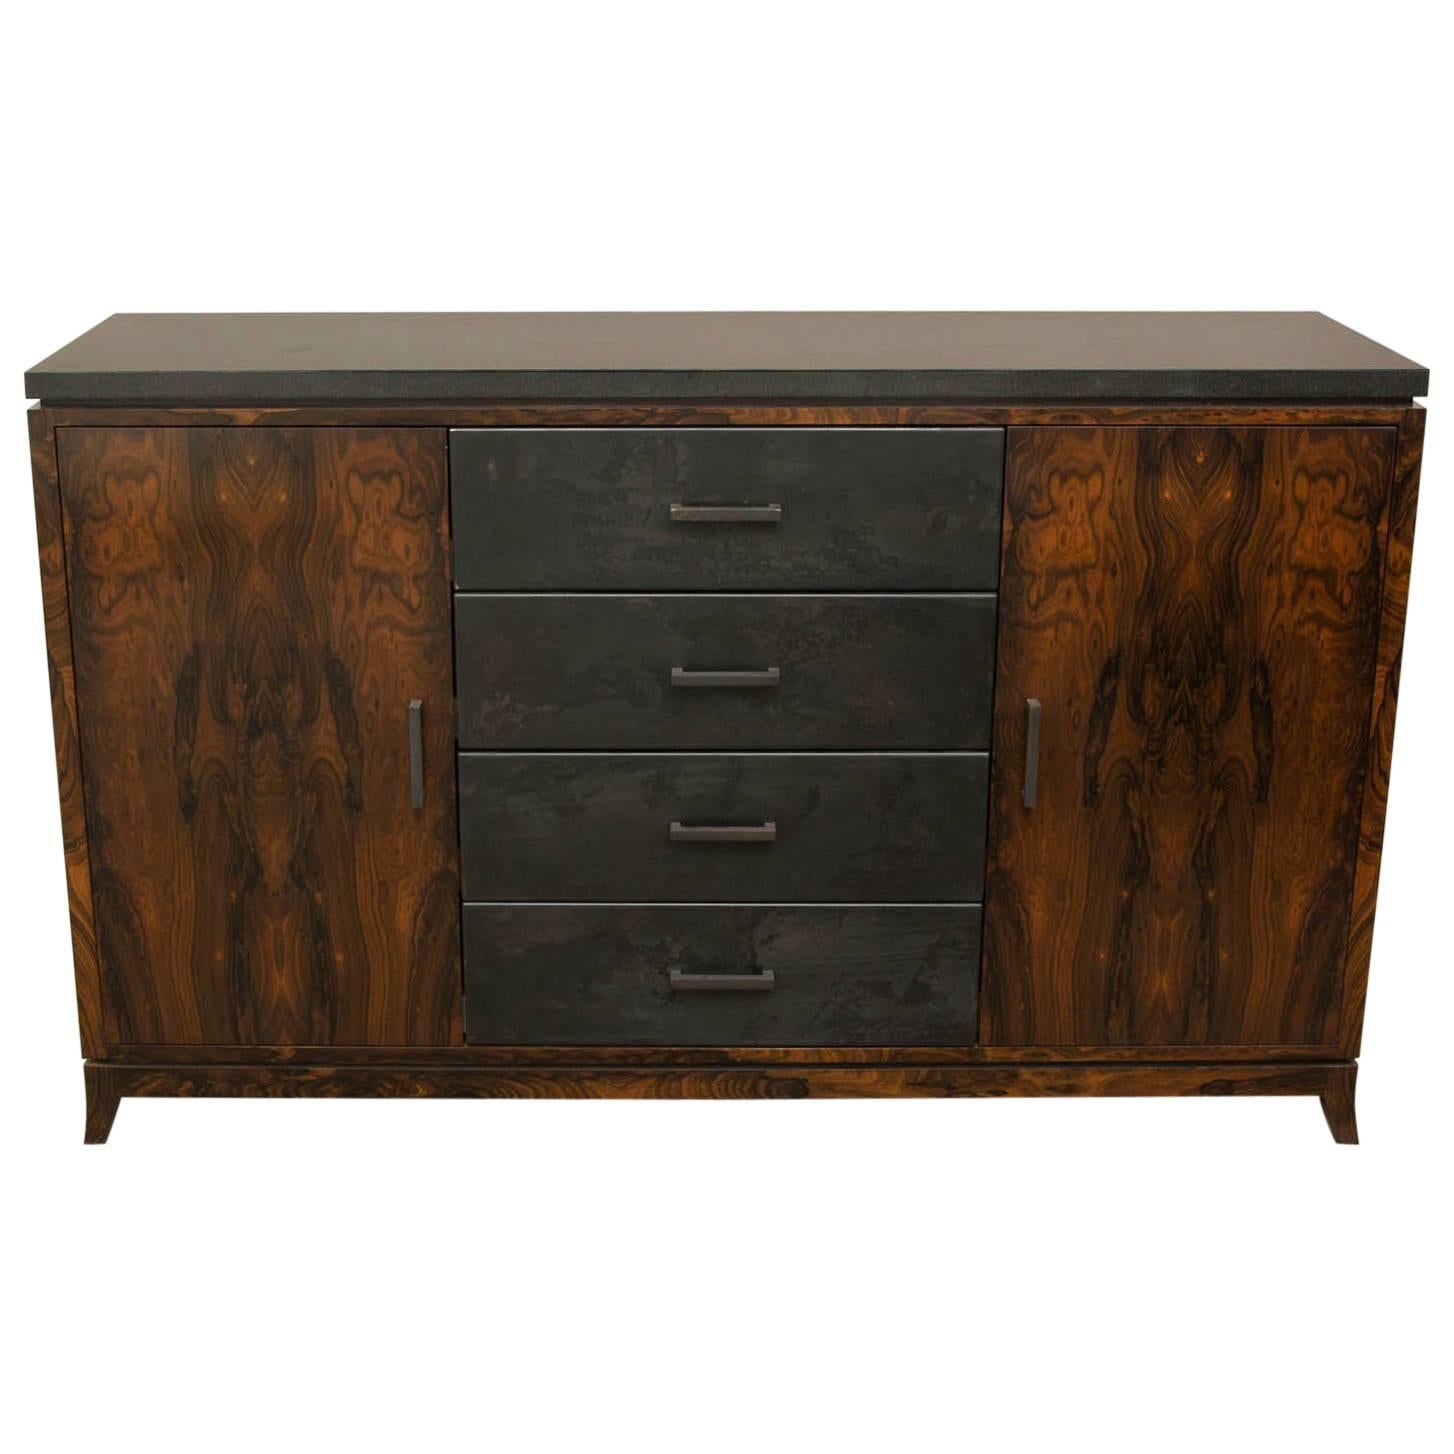 Zircote Wood and Patinated Steel Credenza by Gregory Clark